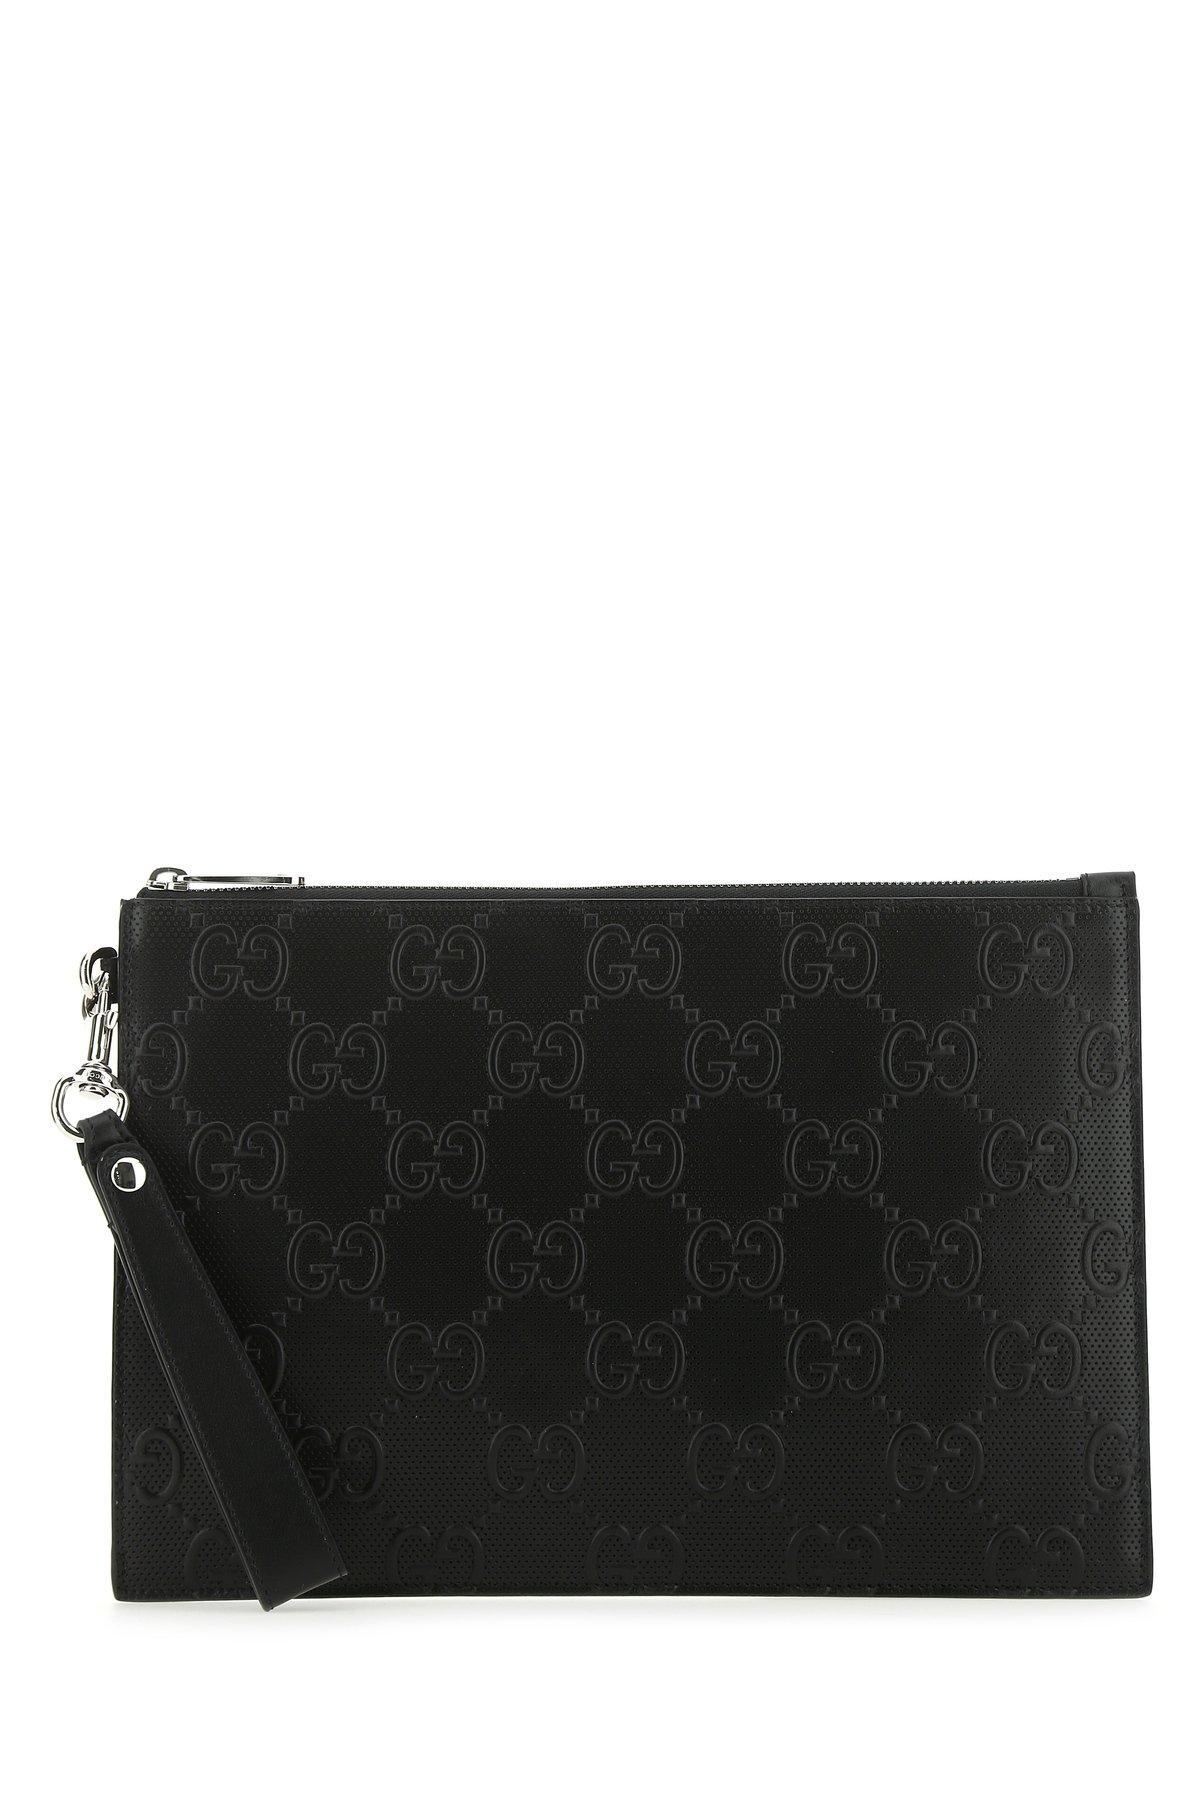 Gucci Monogram Patterned Pouch in Black for Men